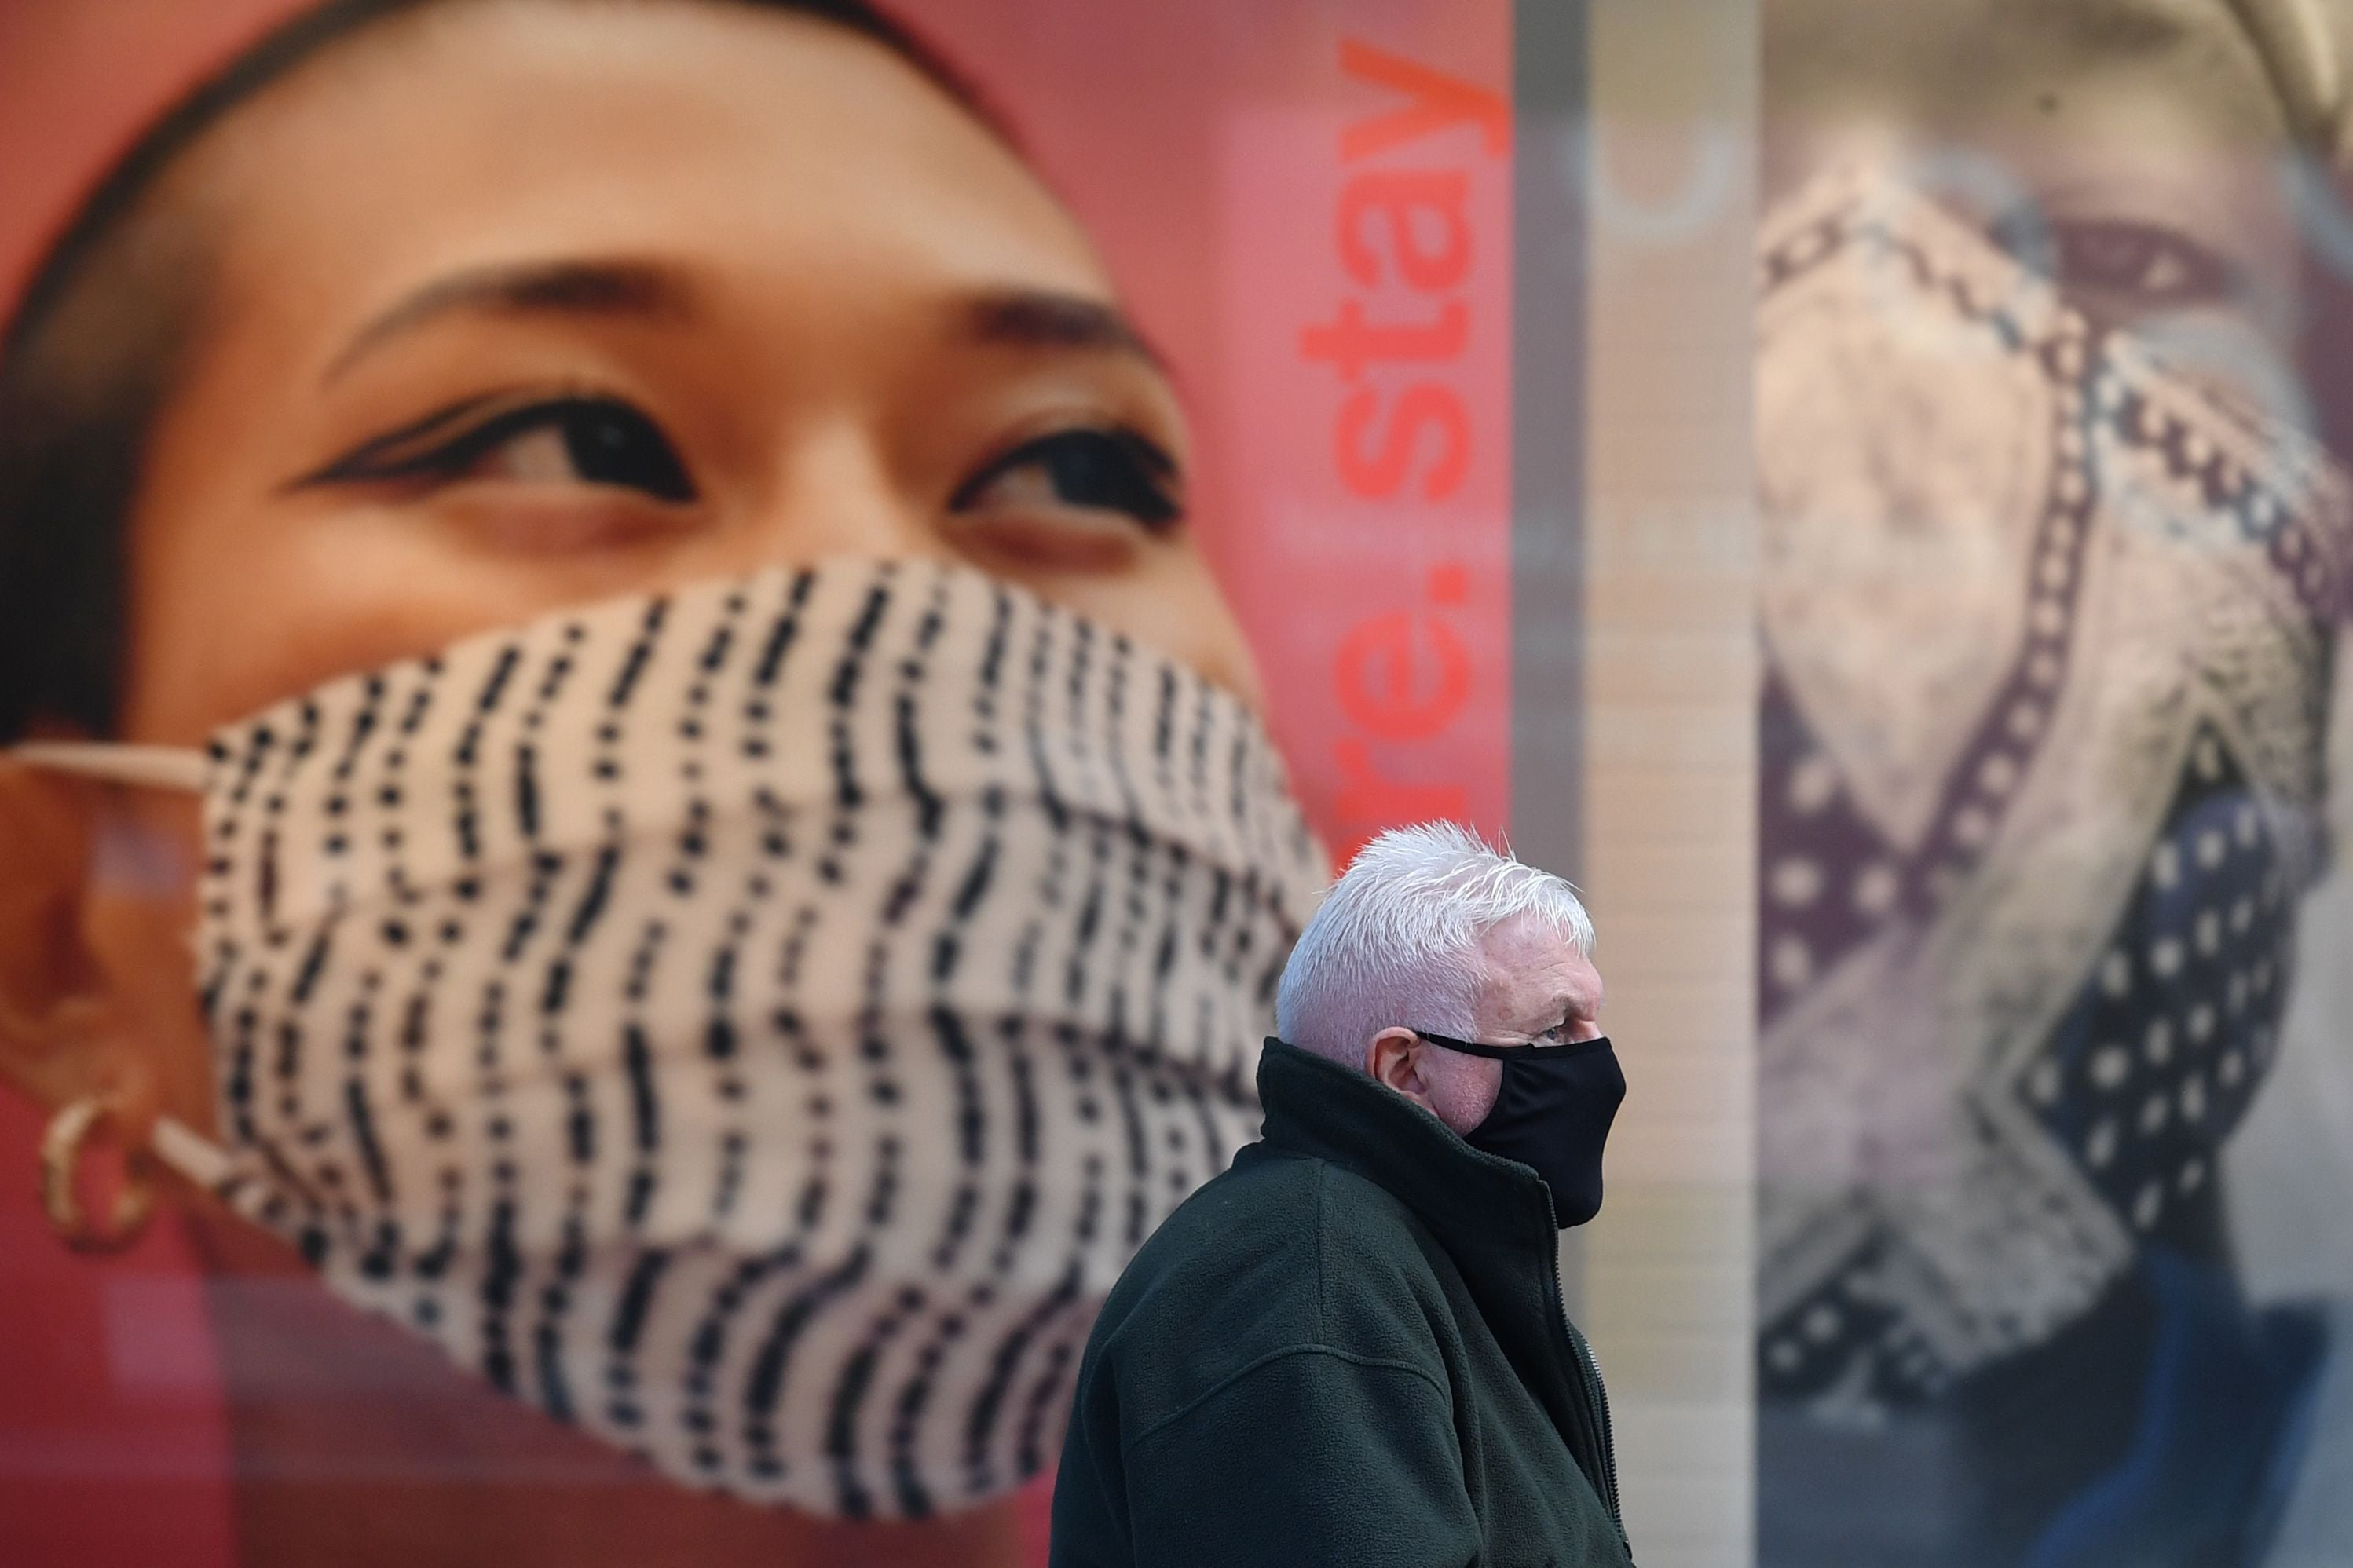 A pedestrian wearing a facemask sits by advertising for facemasks in central Liverpool, one of the regions under tier three measures